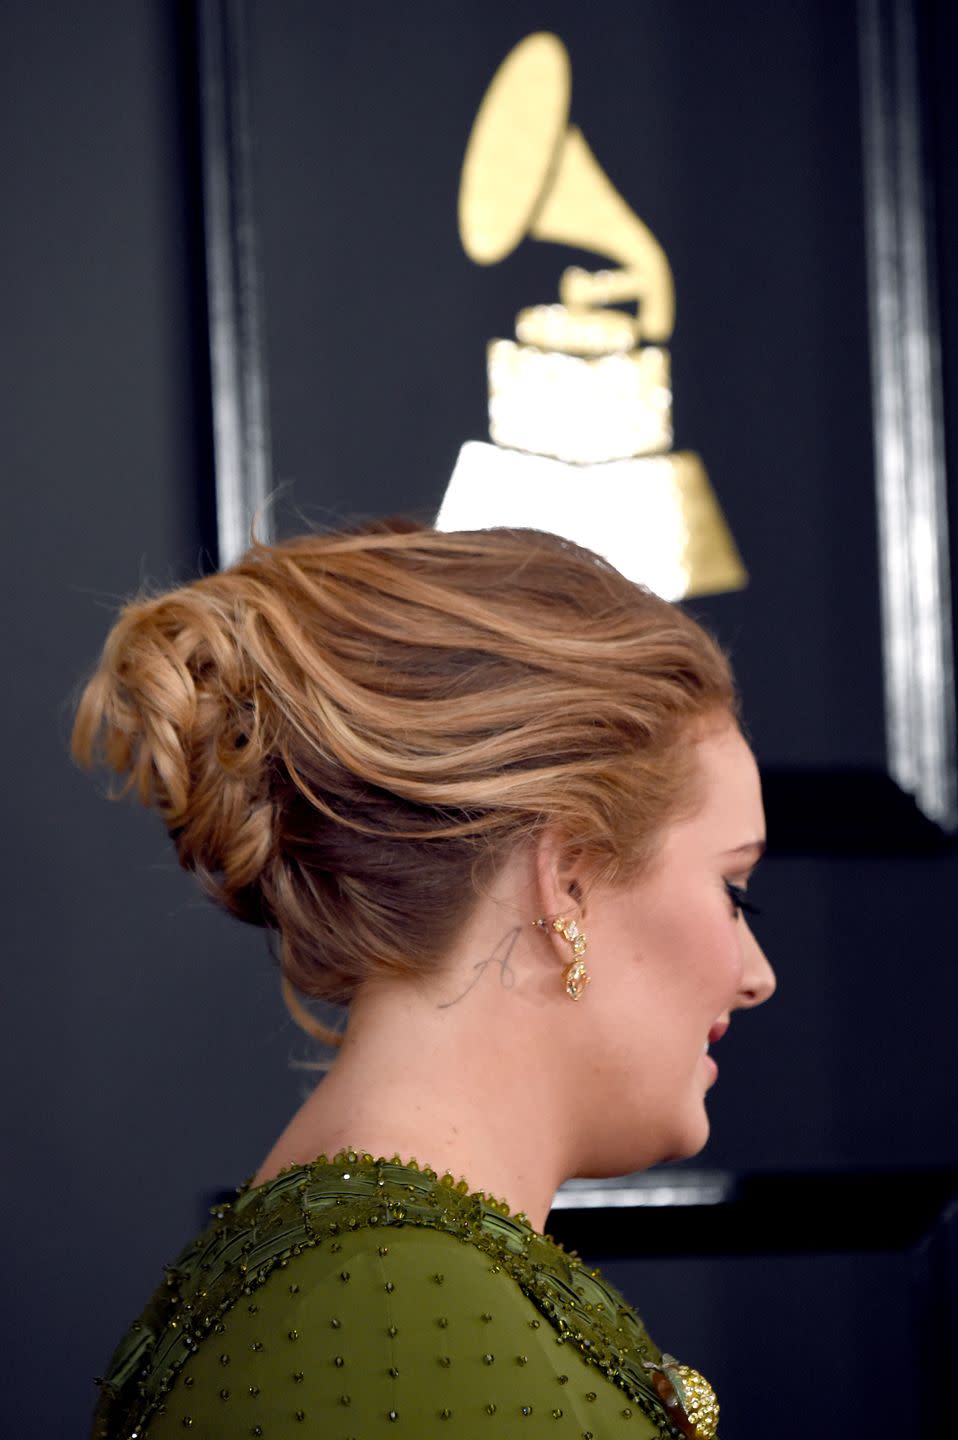 15) Adele's Small "A"